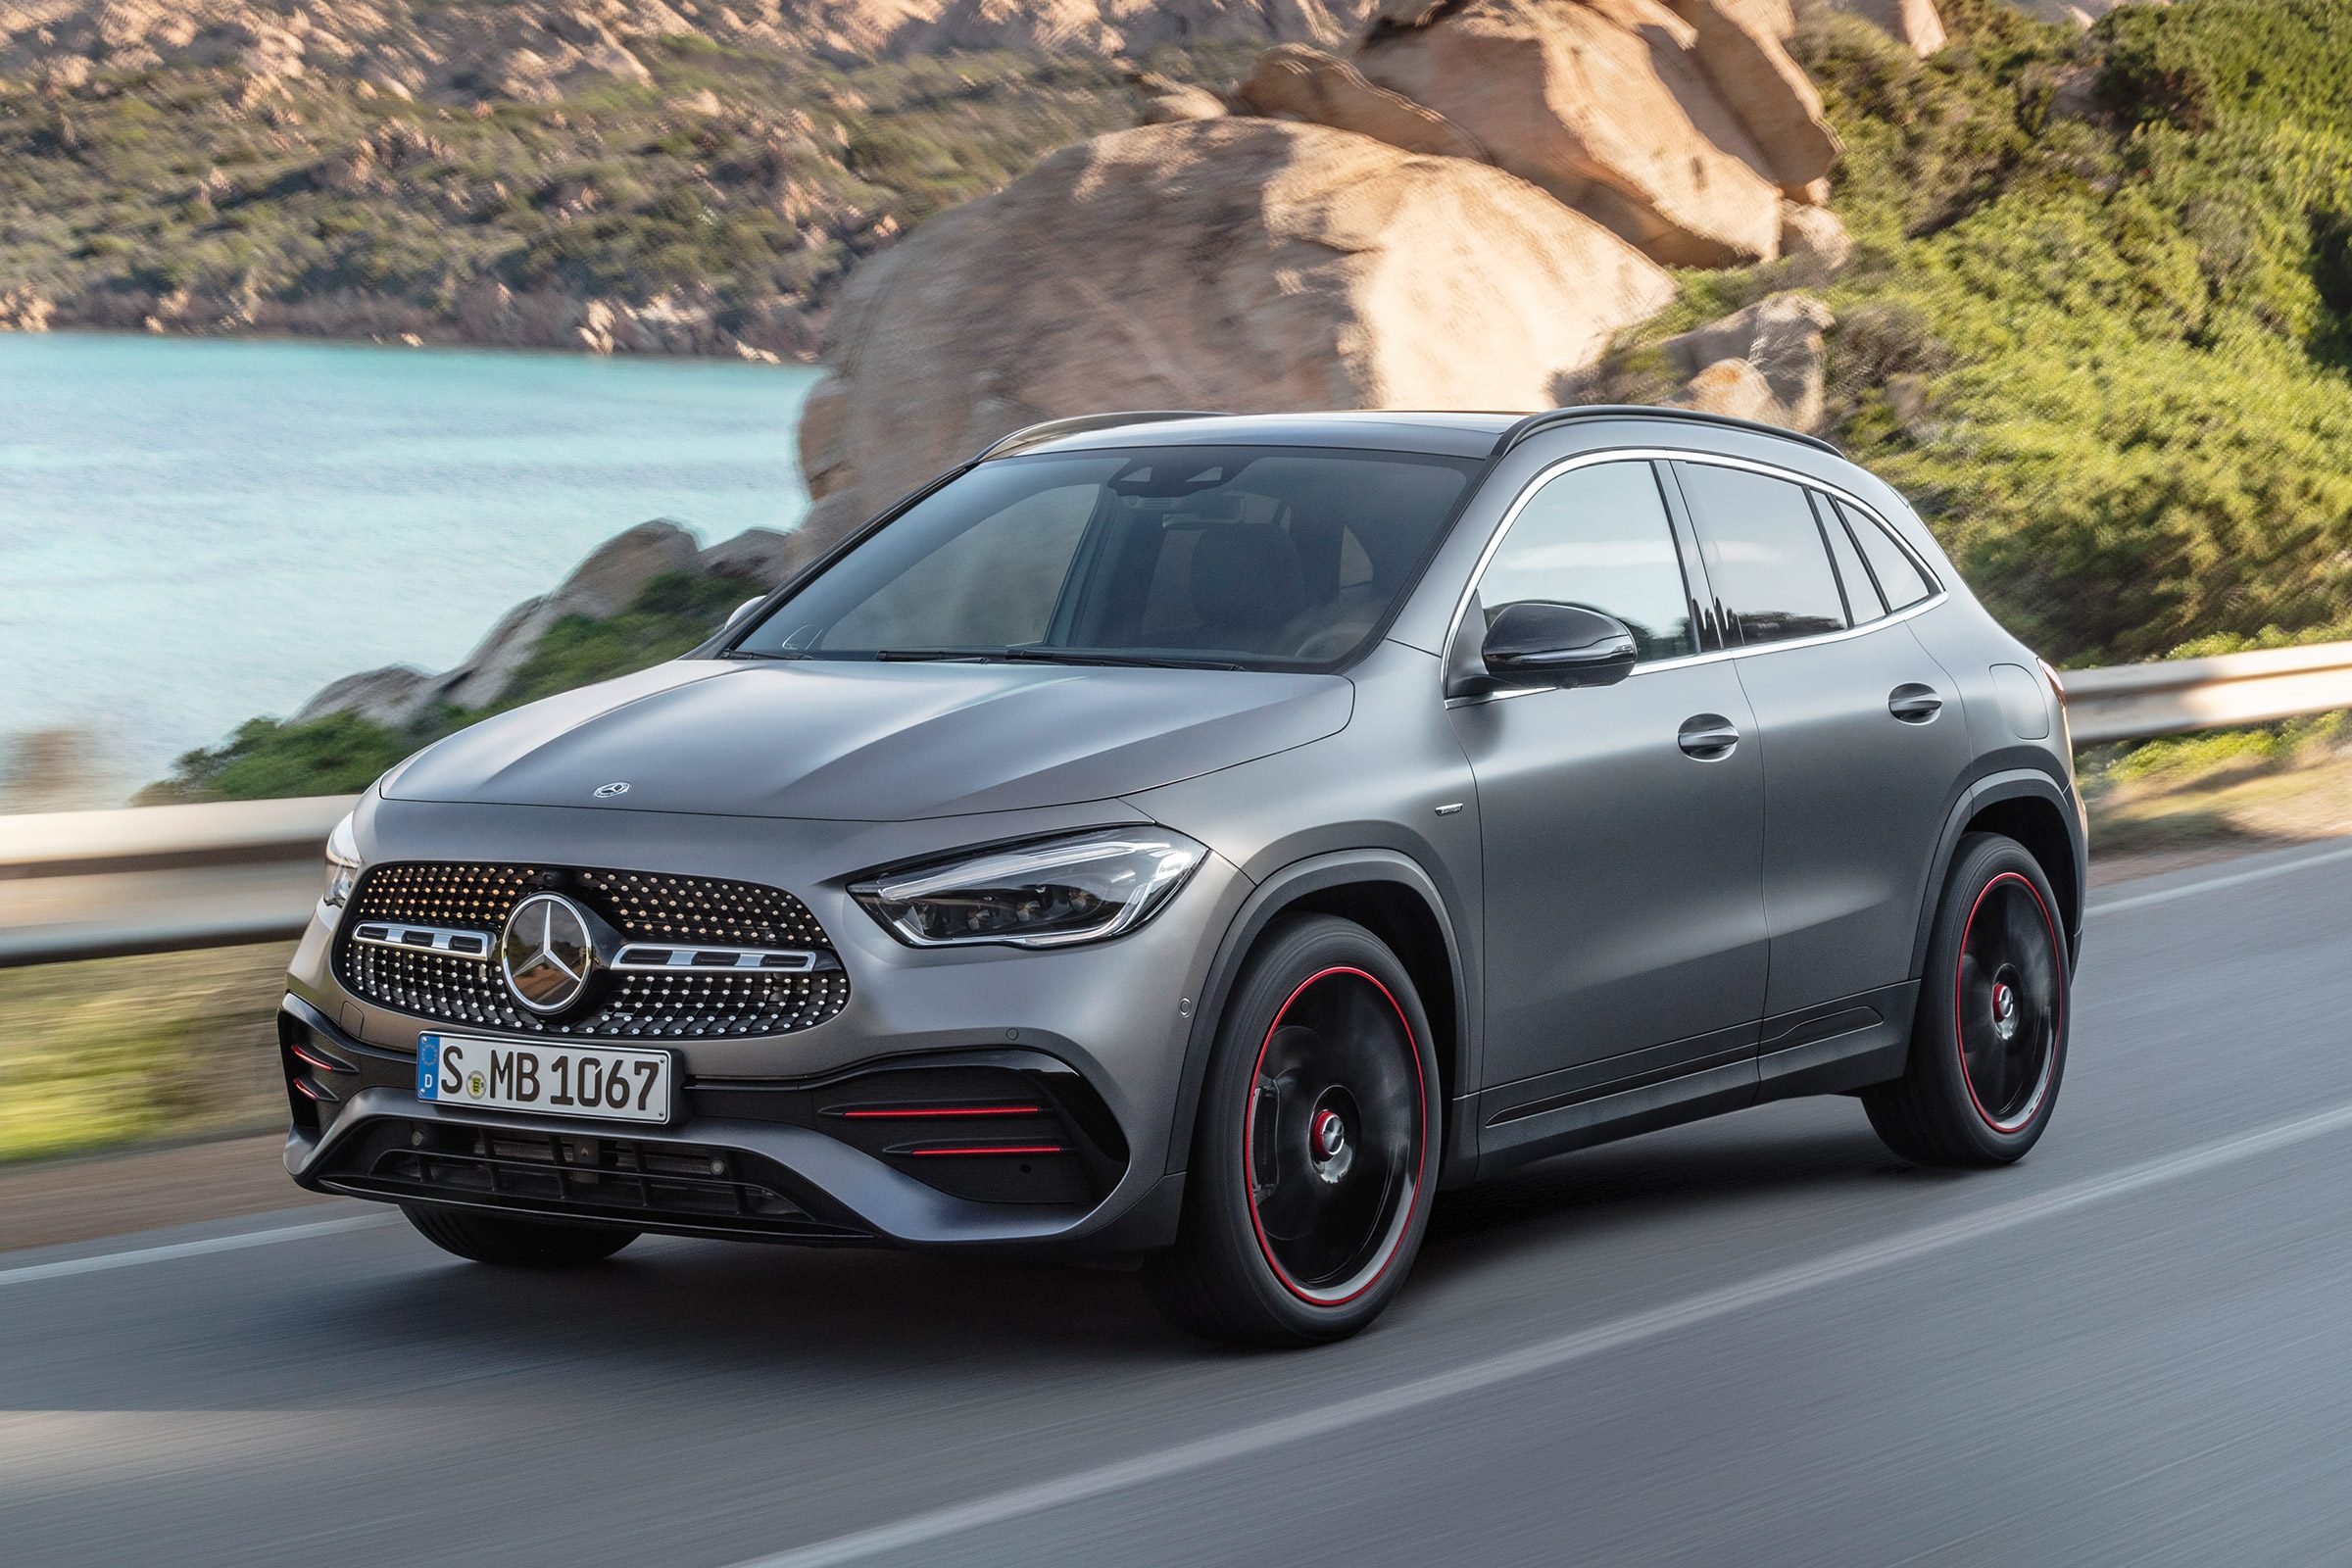 New 2020 Mercedes GLA arrives to tackle the BMW X2 Motor